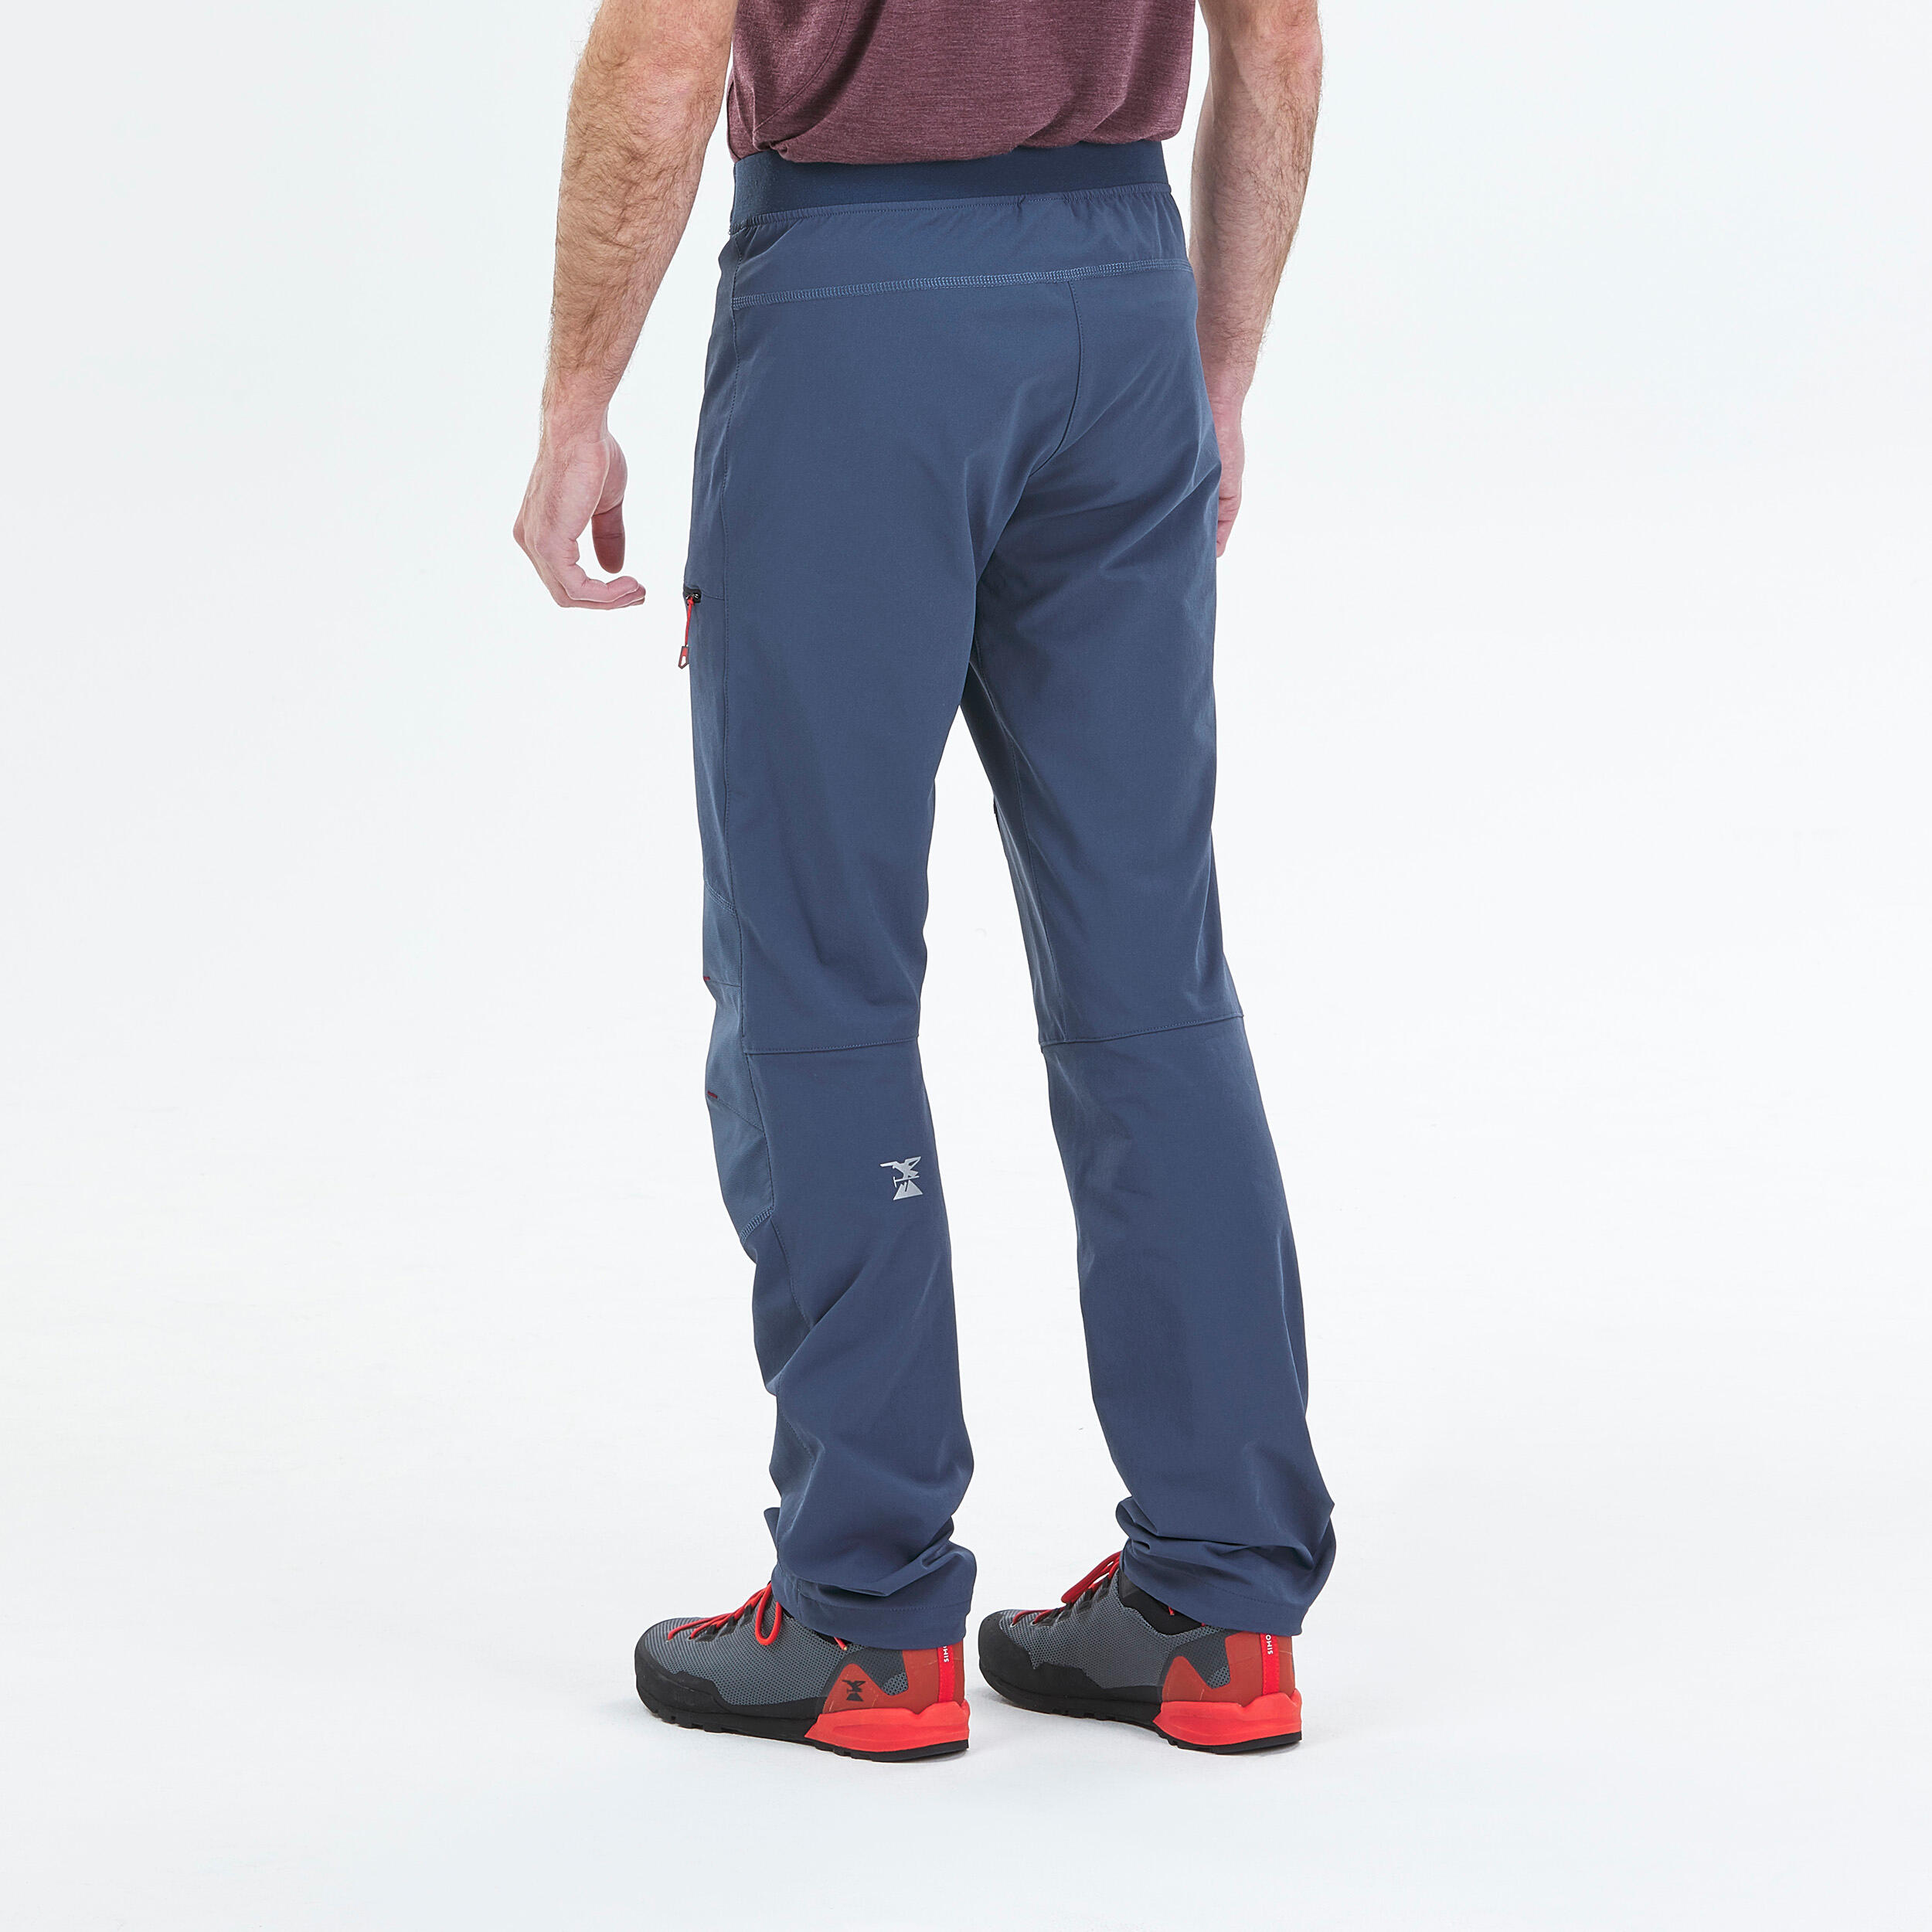 Men's climbing and mountaineering lightweight trousers - ROCK EVO - Blue 2/10